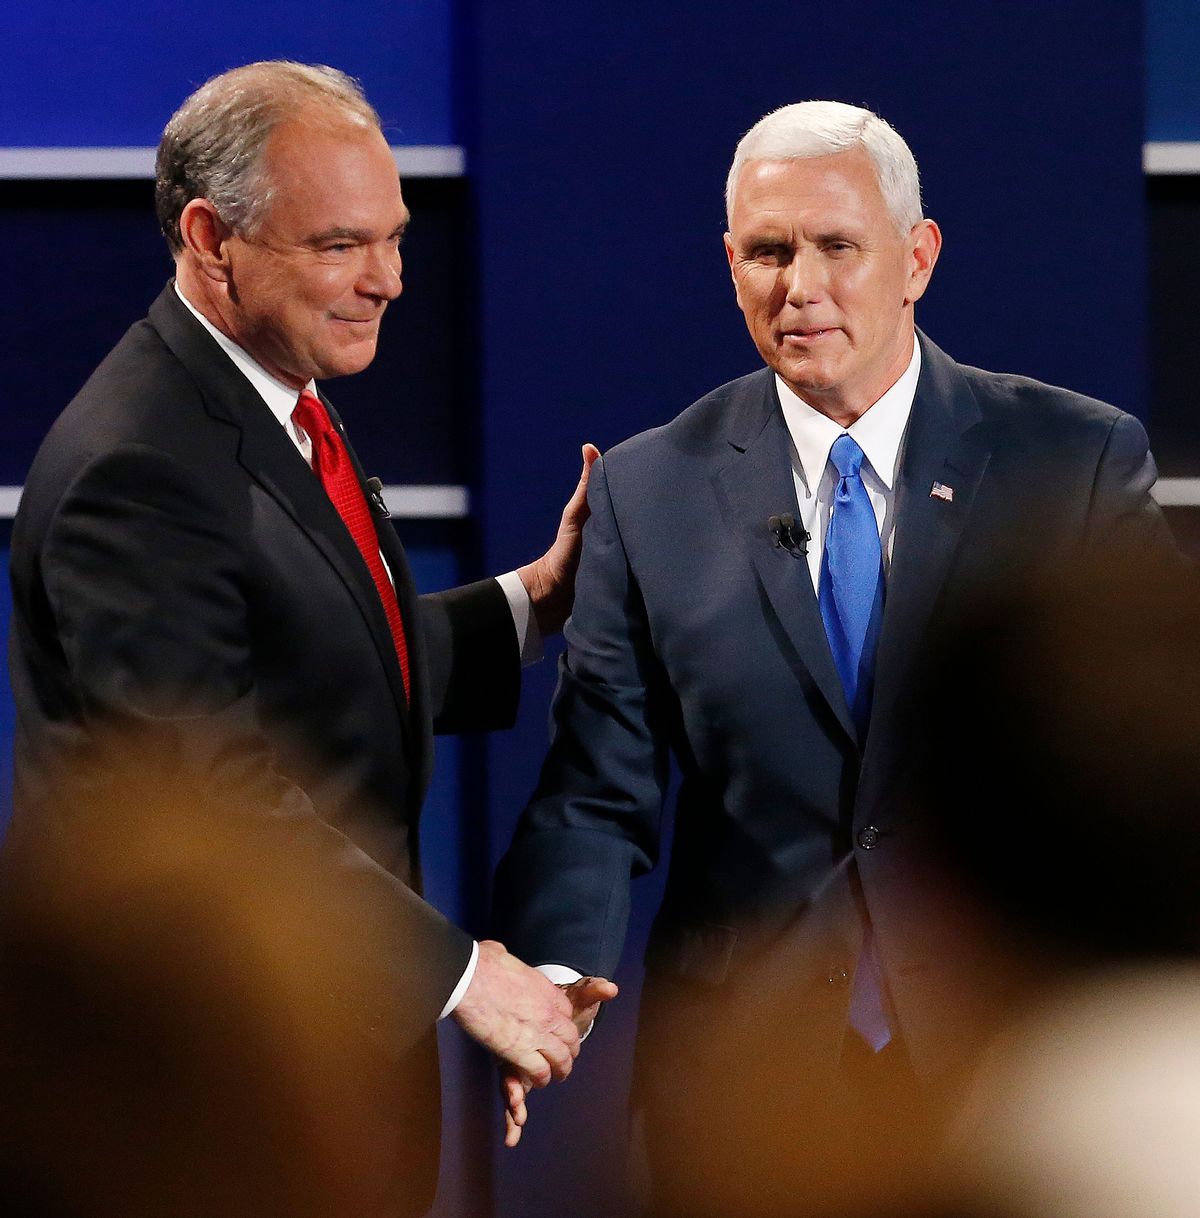 Republican vice-presidential nominee Gov. Mike Pence, right, and Democratic vice-presidential nominee Sen. Tim Kaine shake hands after the debate (AP)